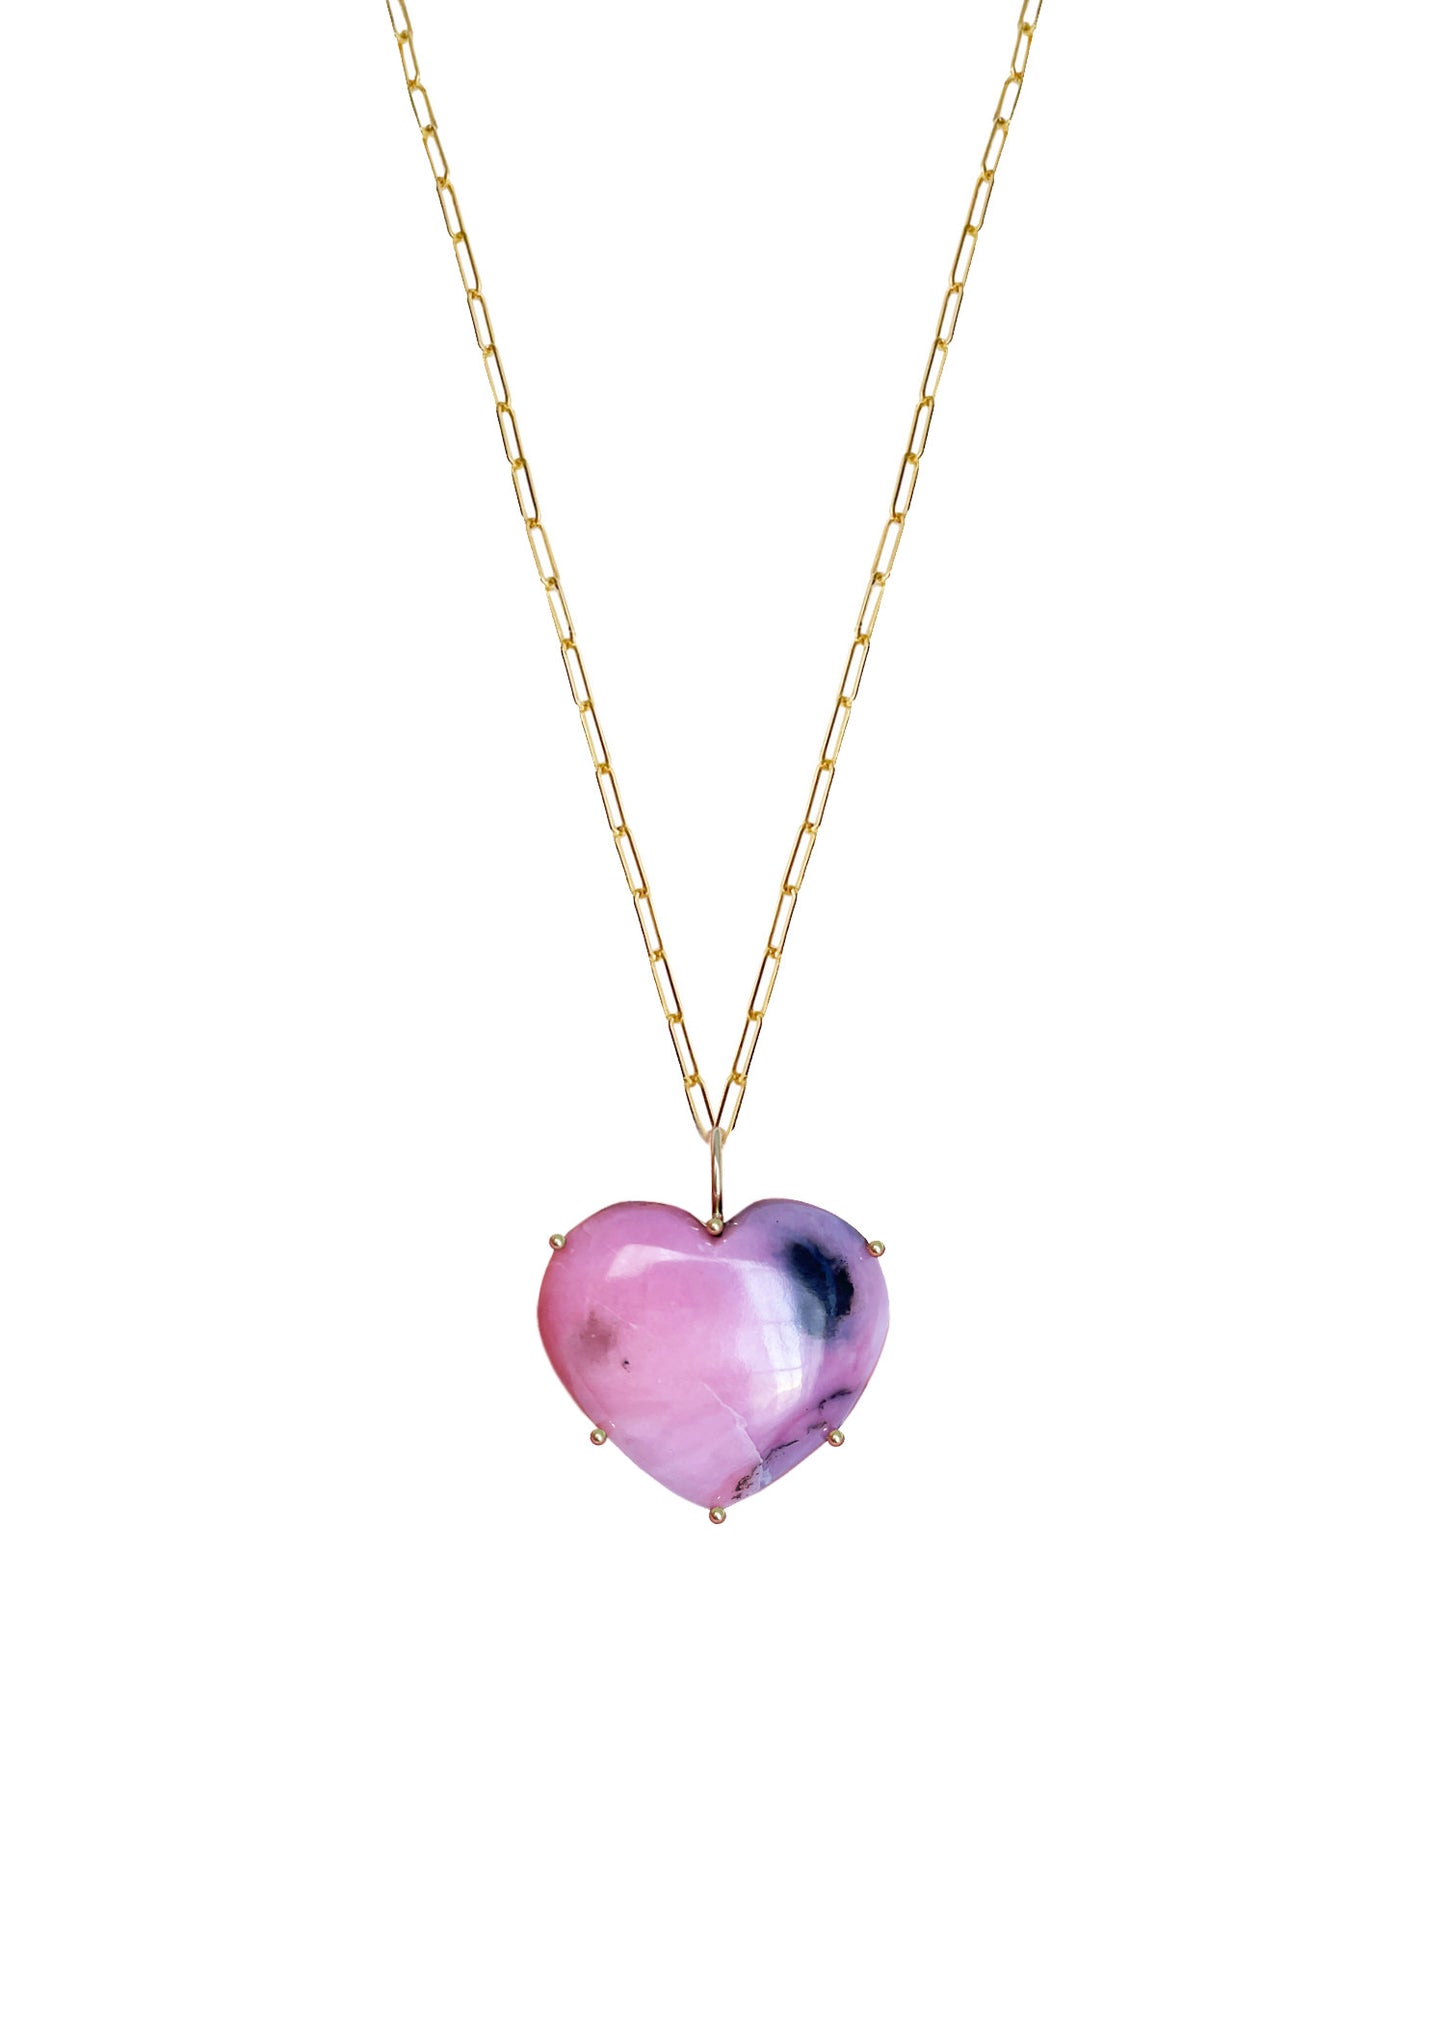 Cabochon Large Heart Necklace - Amethyst